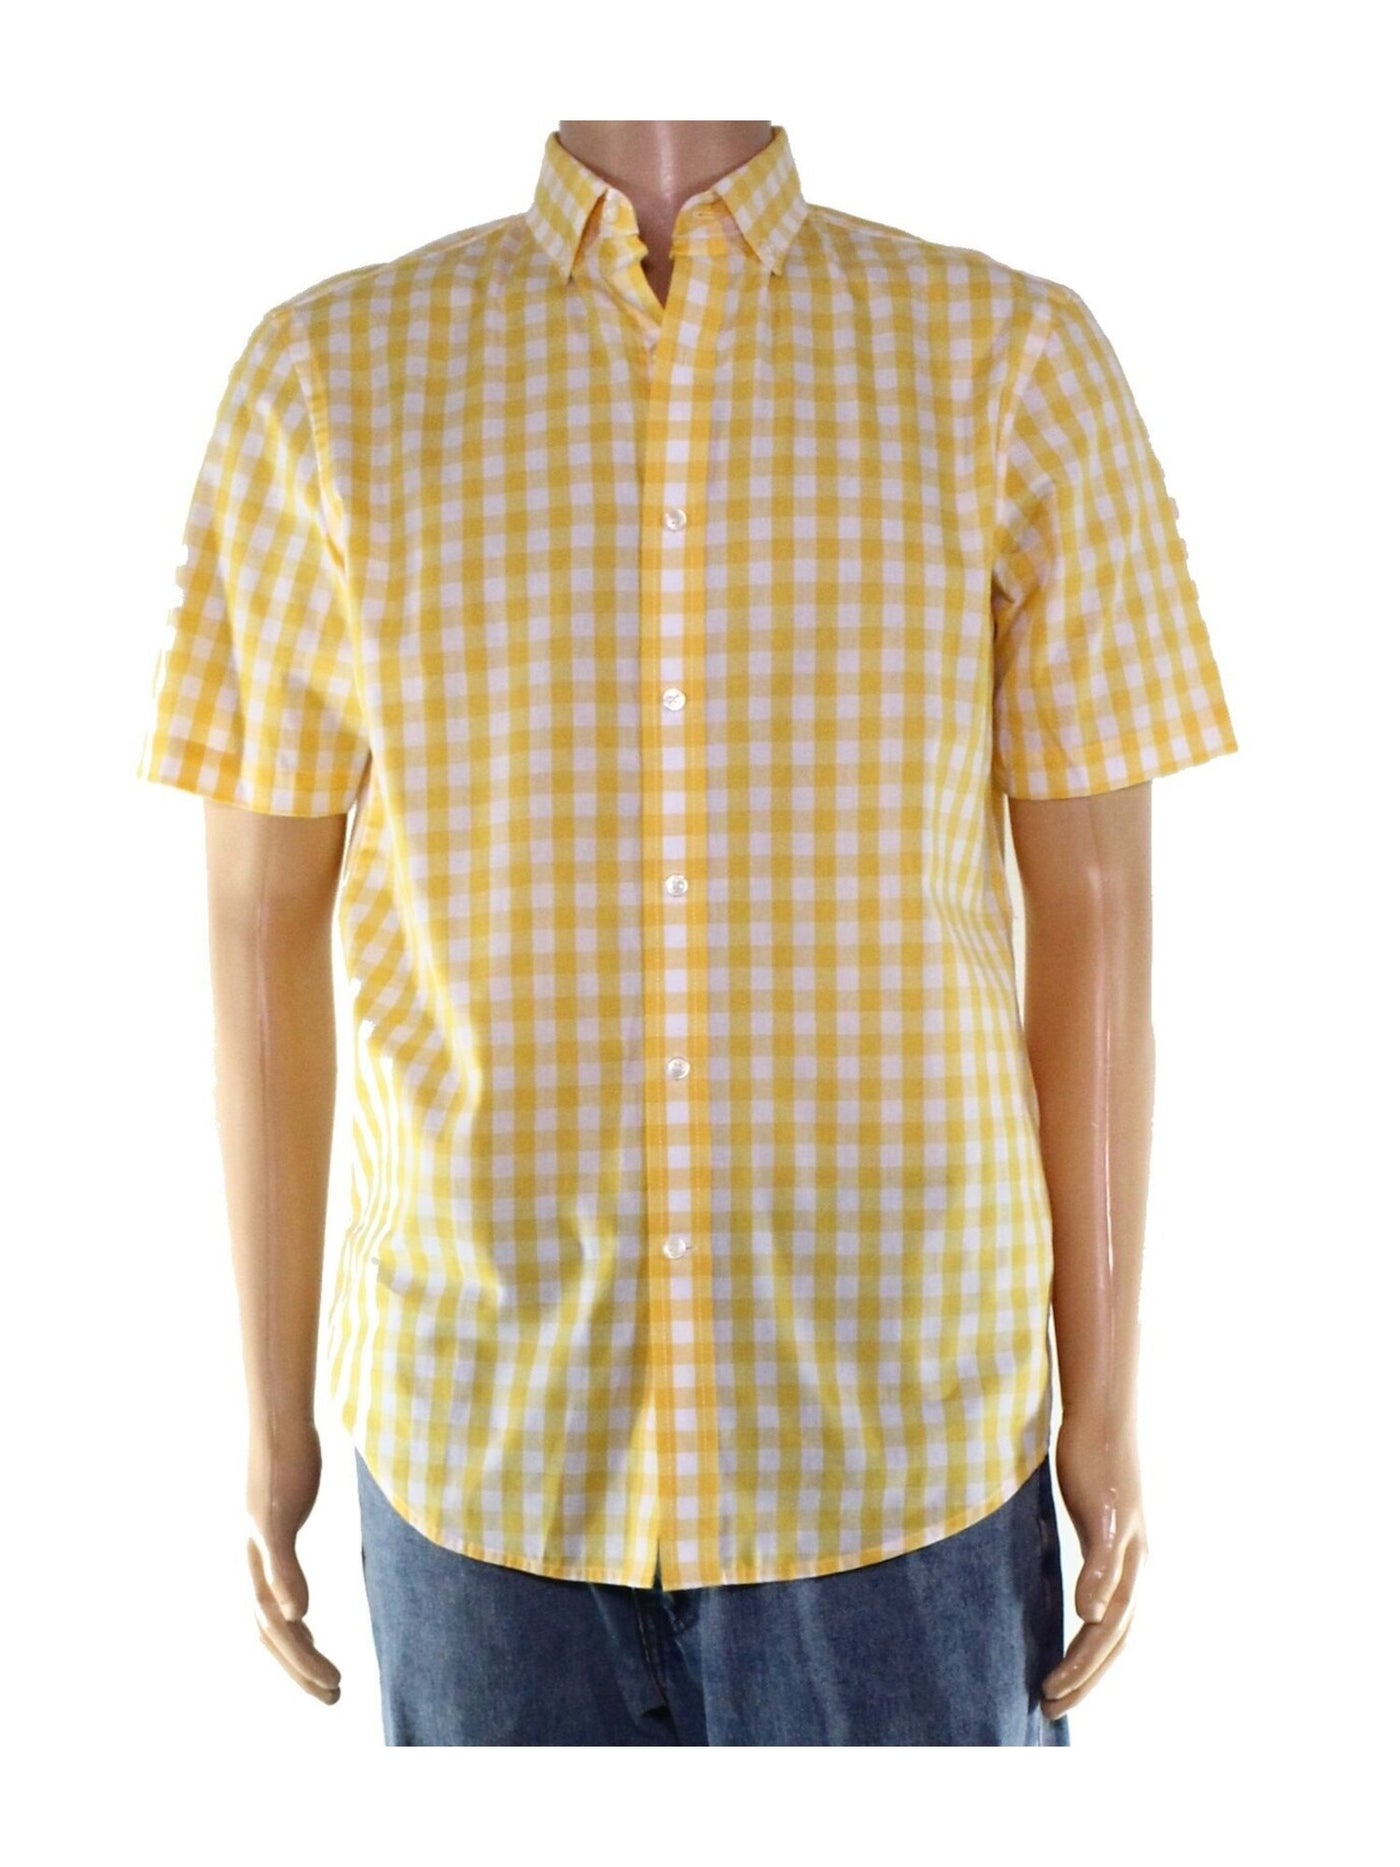 CLUBROOM Mens Yellow Multi-Check Collared Classic Fit Dress Shirt L